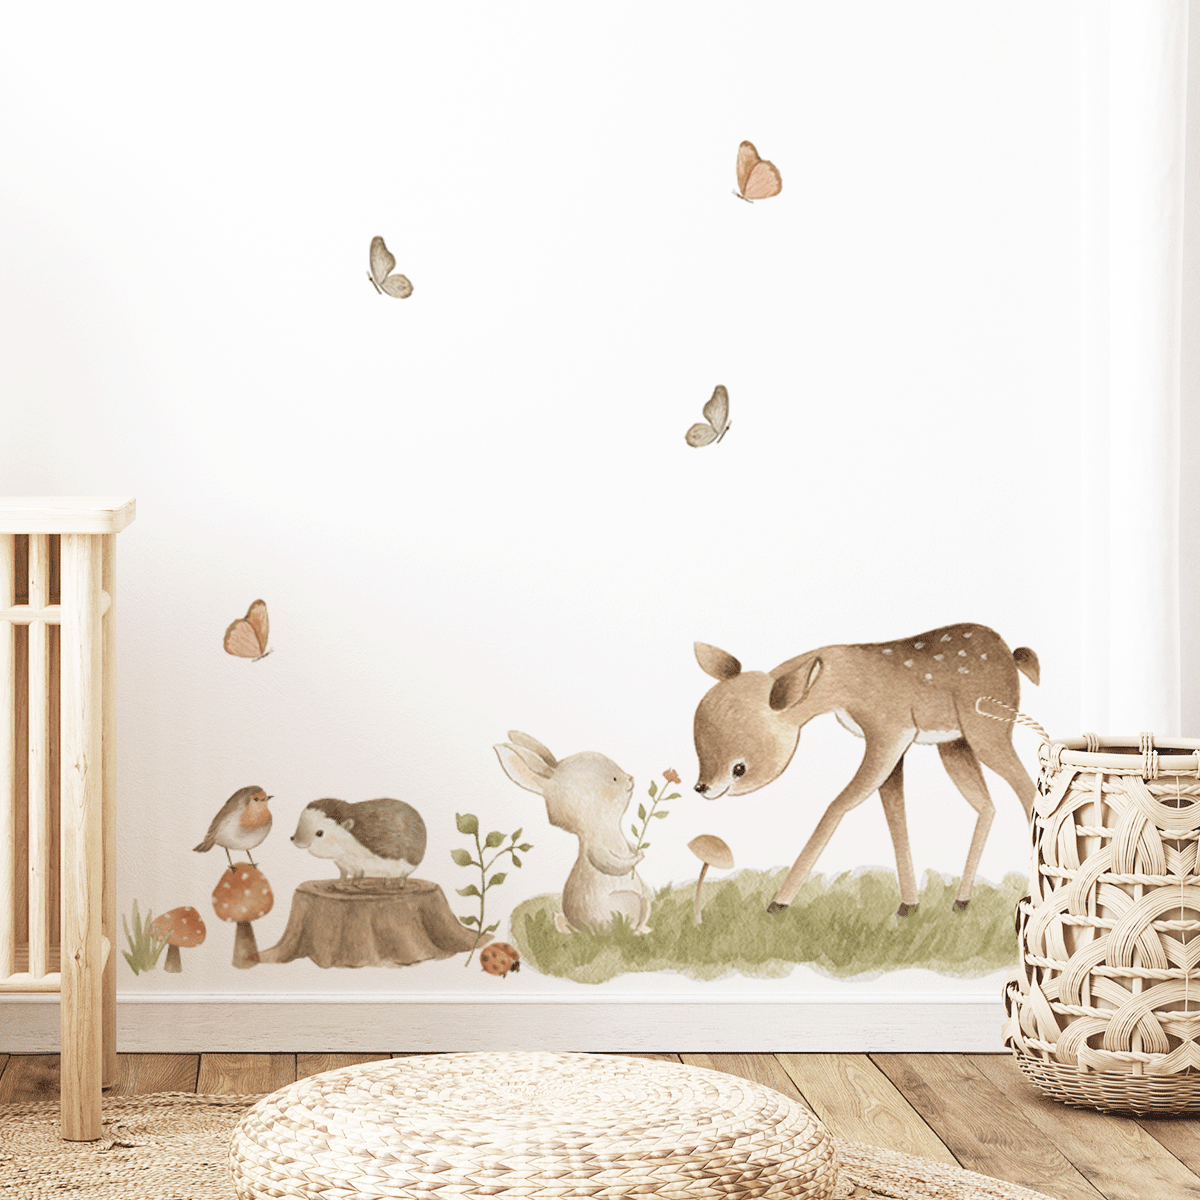 forest animals wall stickers, deer wall stickers, forest animals wall decal